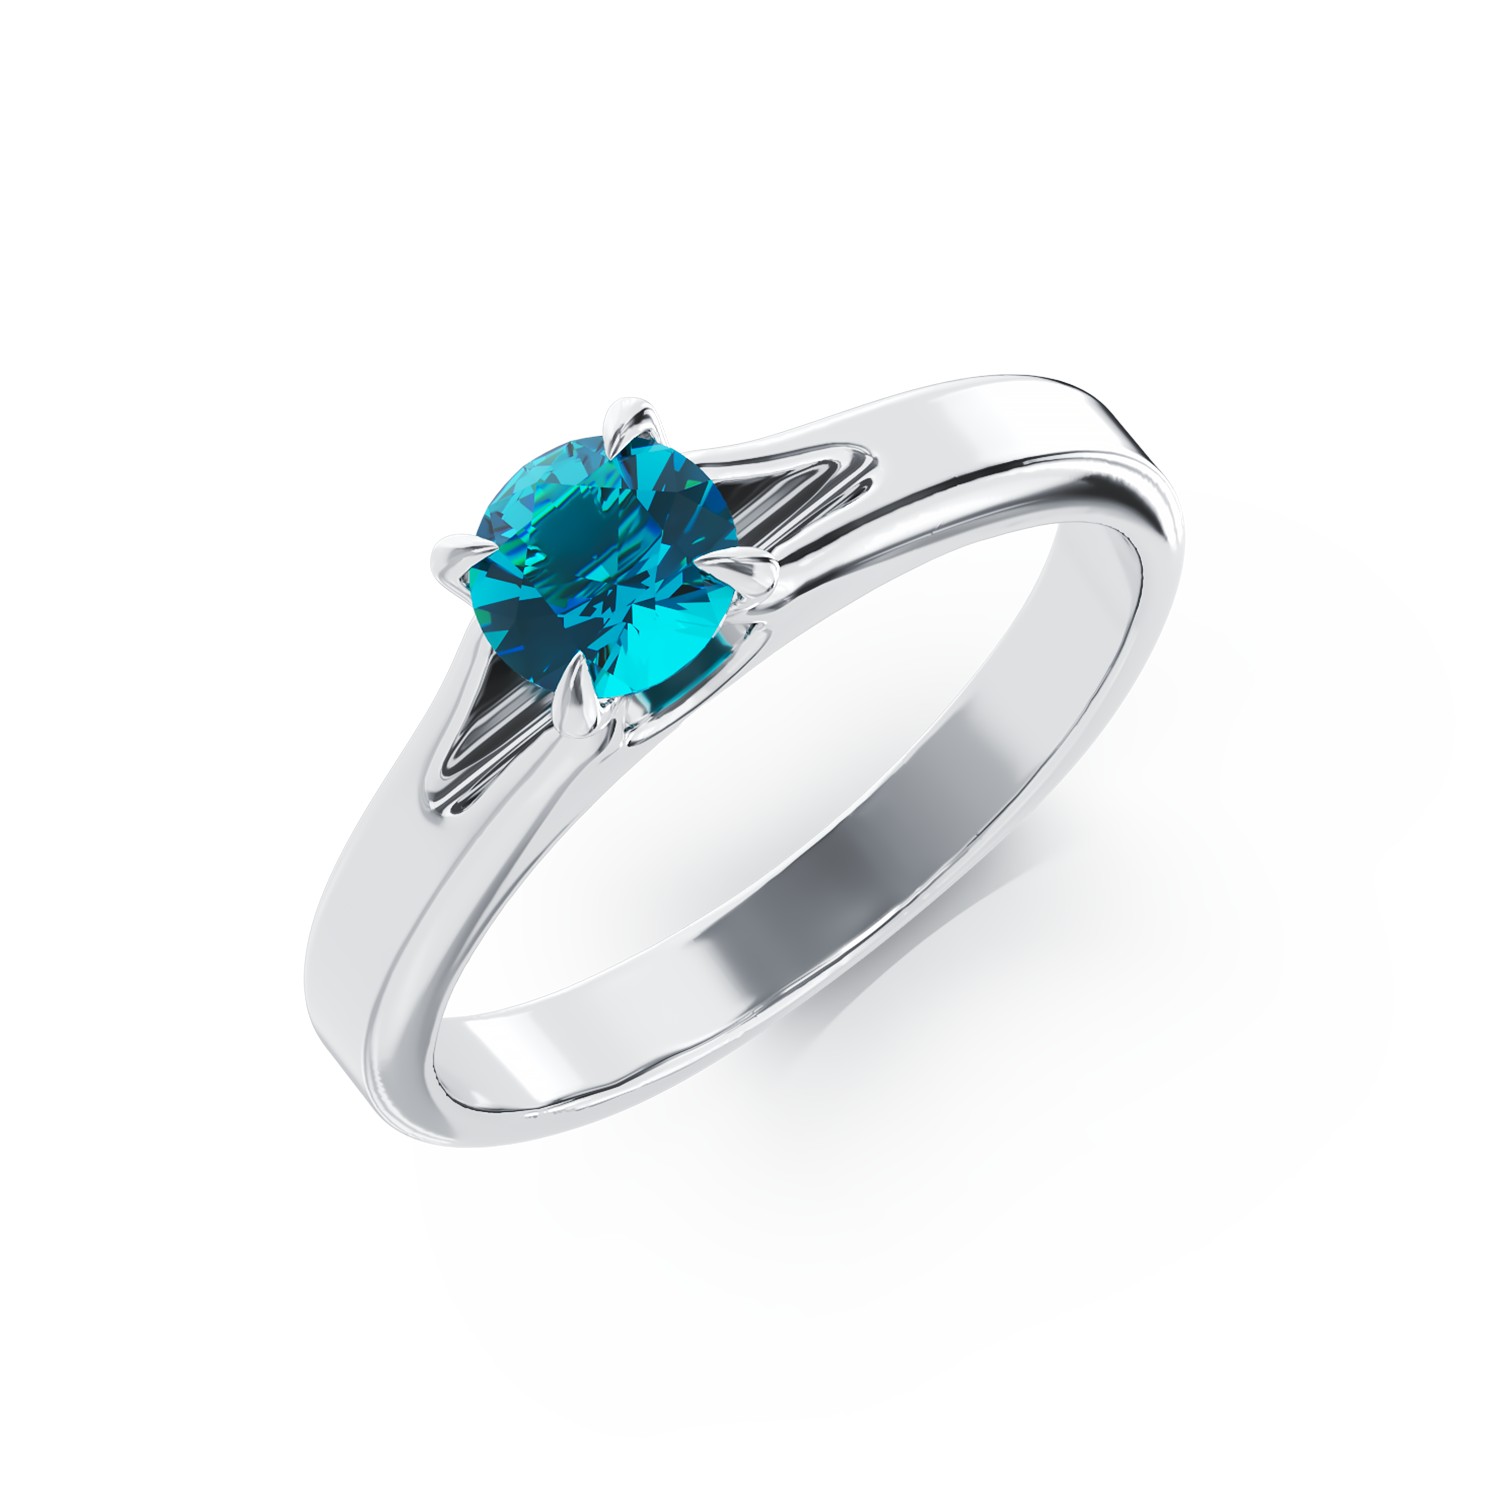 18K white gold engagement ring with a 0.33ct blue solitaire diamond